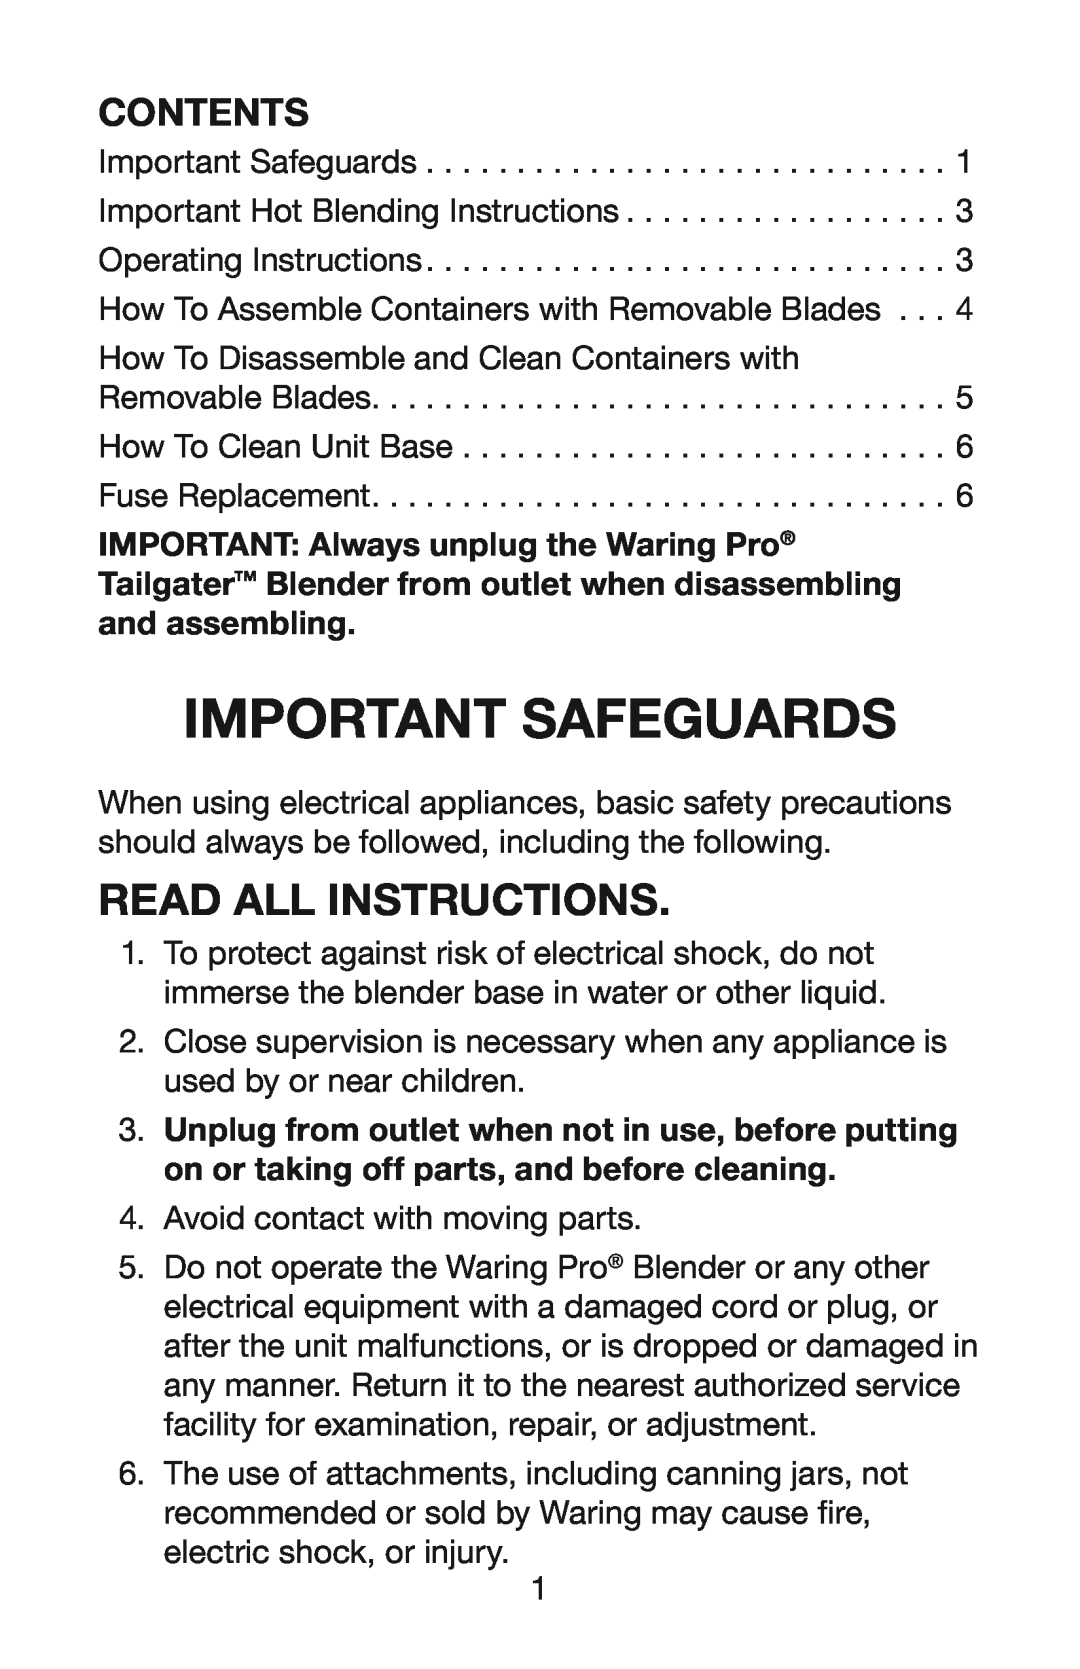 Waring TG15 manual Important Safeguards, Contents, Read All Instructions 